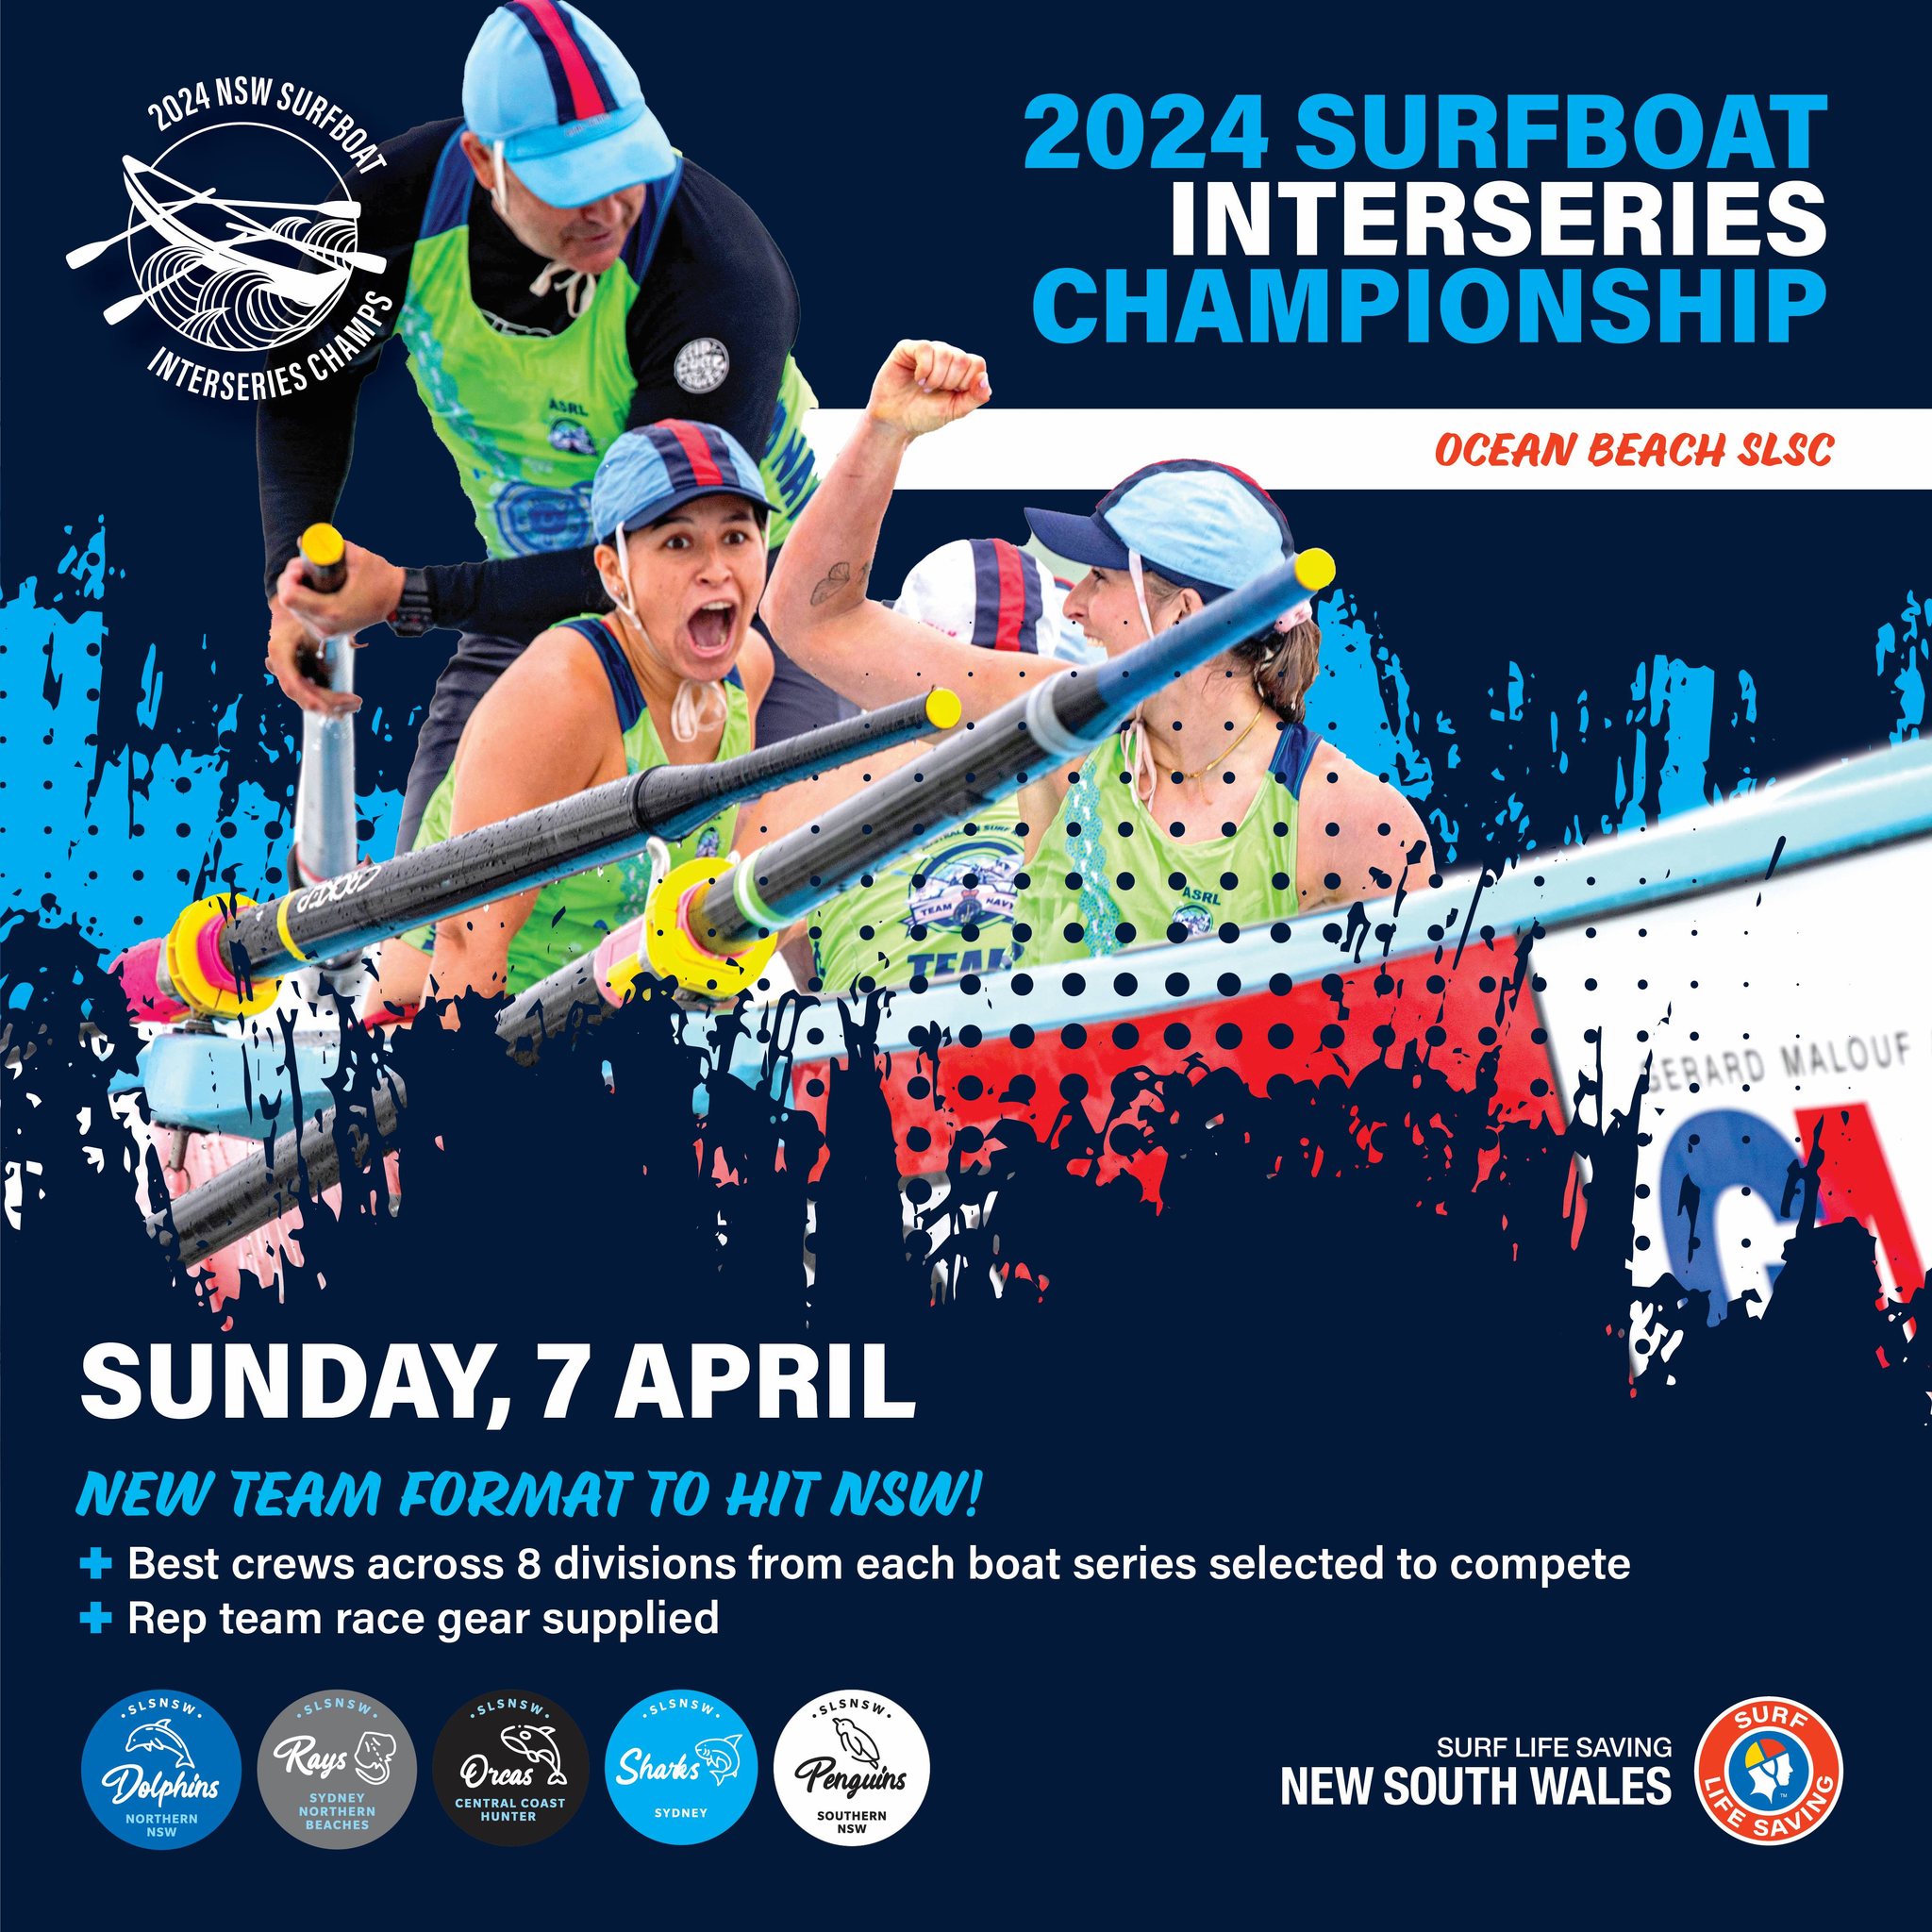 2024 Surf Boats Interseries Championship Graphic